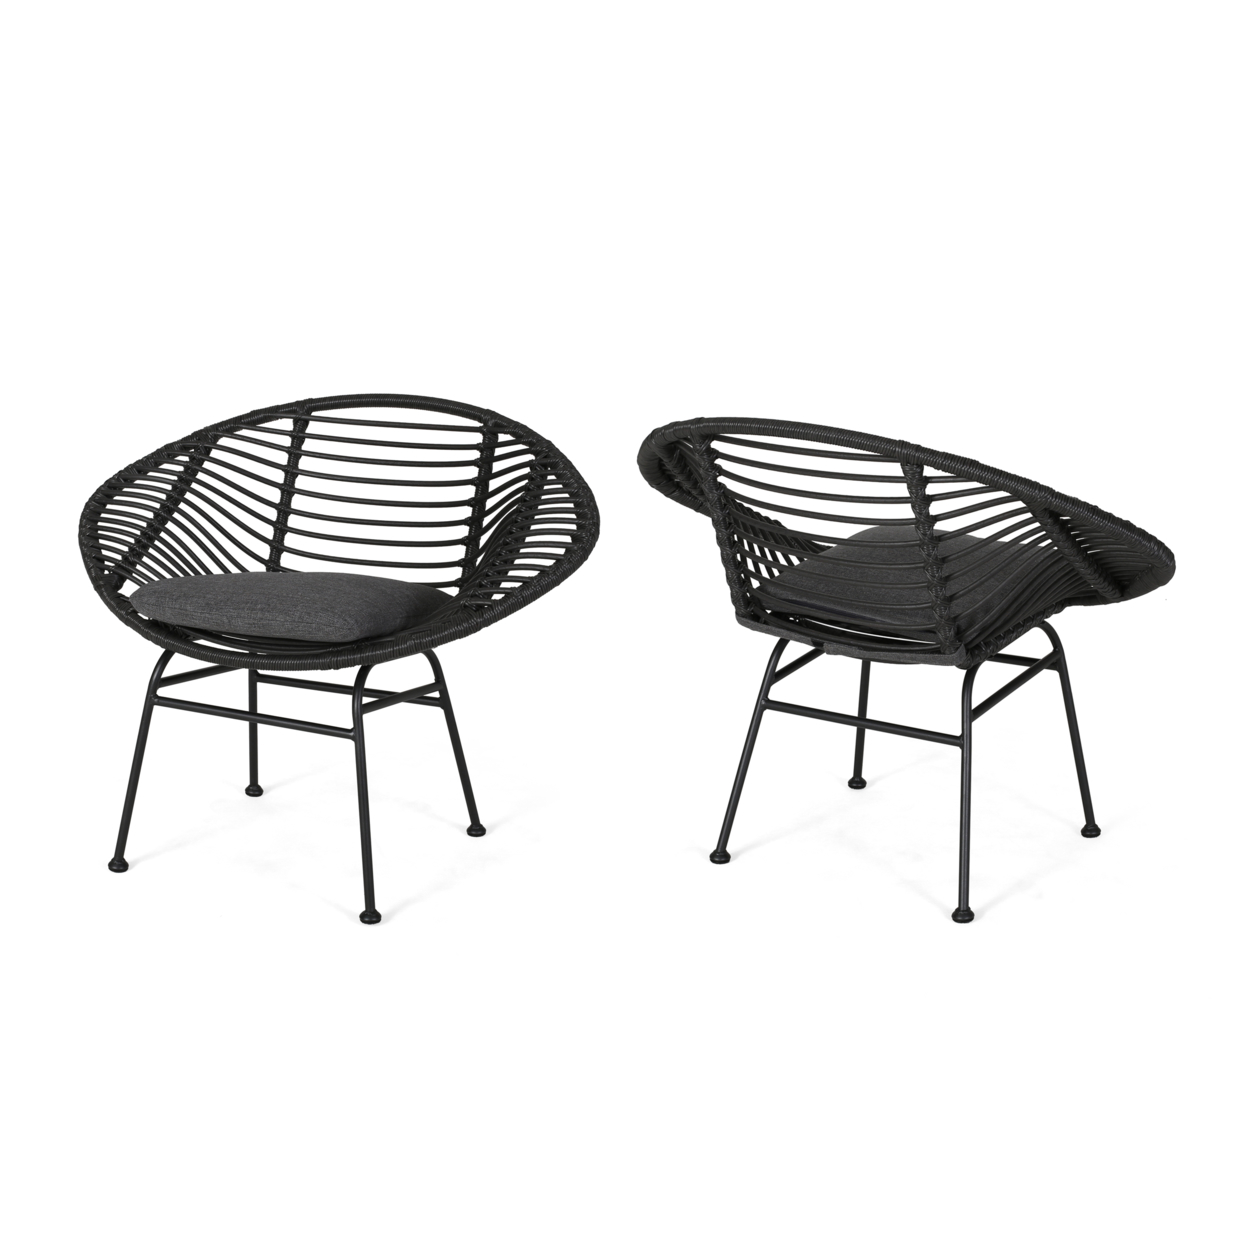 Aleah Indoor Woven Faux Rattan Chairs With Cushions (Set Of 2) - Gray + Dark Gray